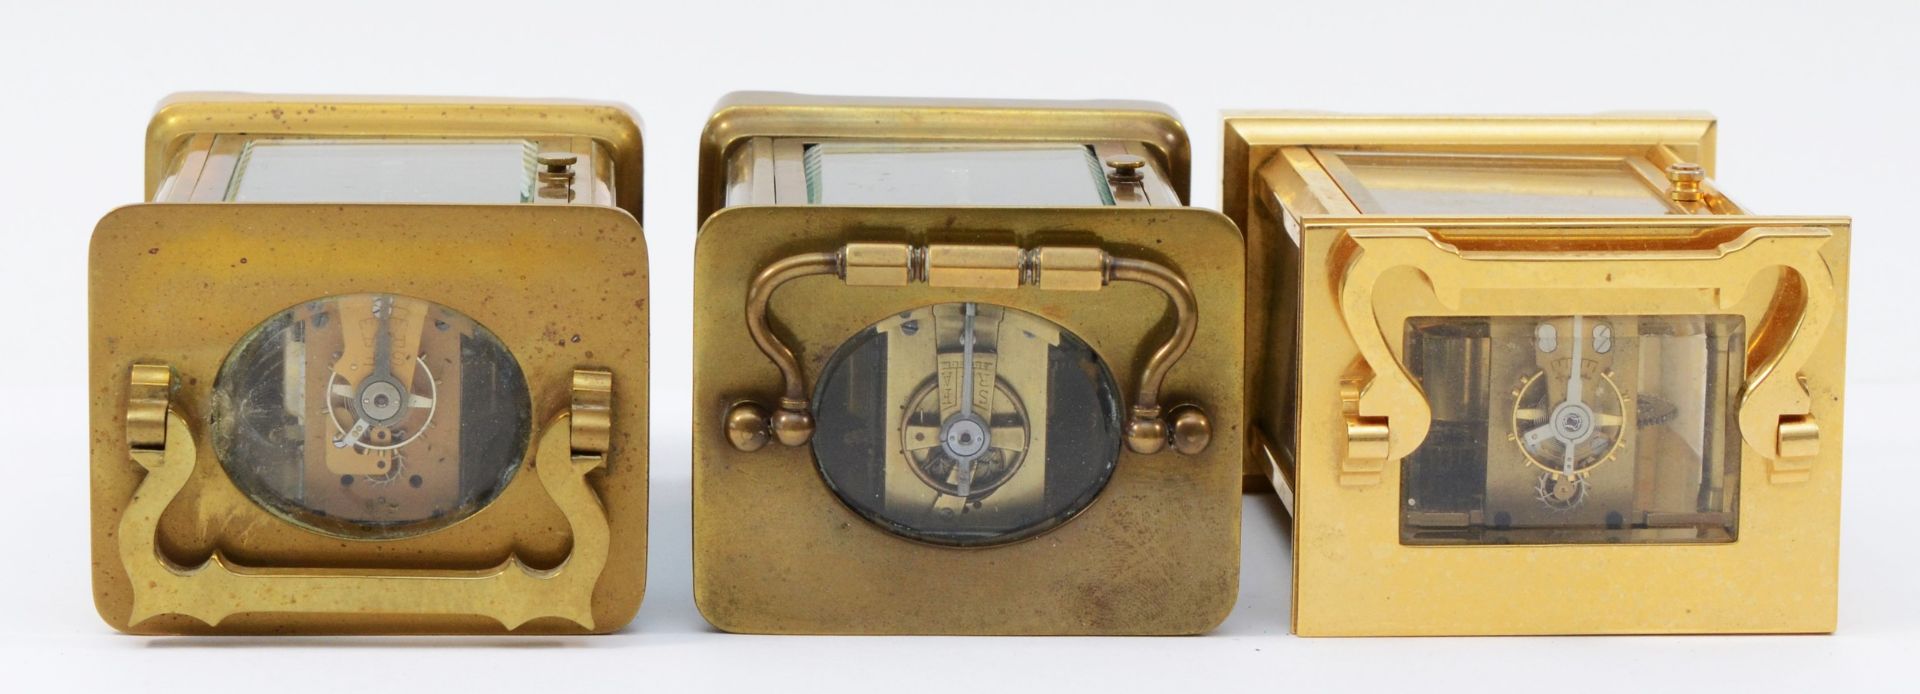 An English brass cased 8 day carriage clock, circa 1980s, together with two French examples. (3) - Image 5 of 5